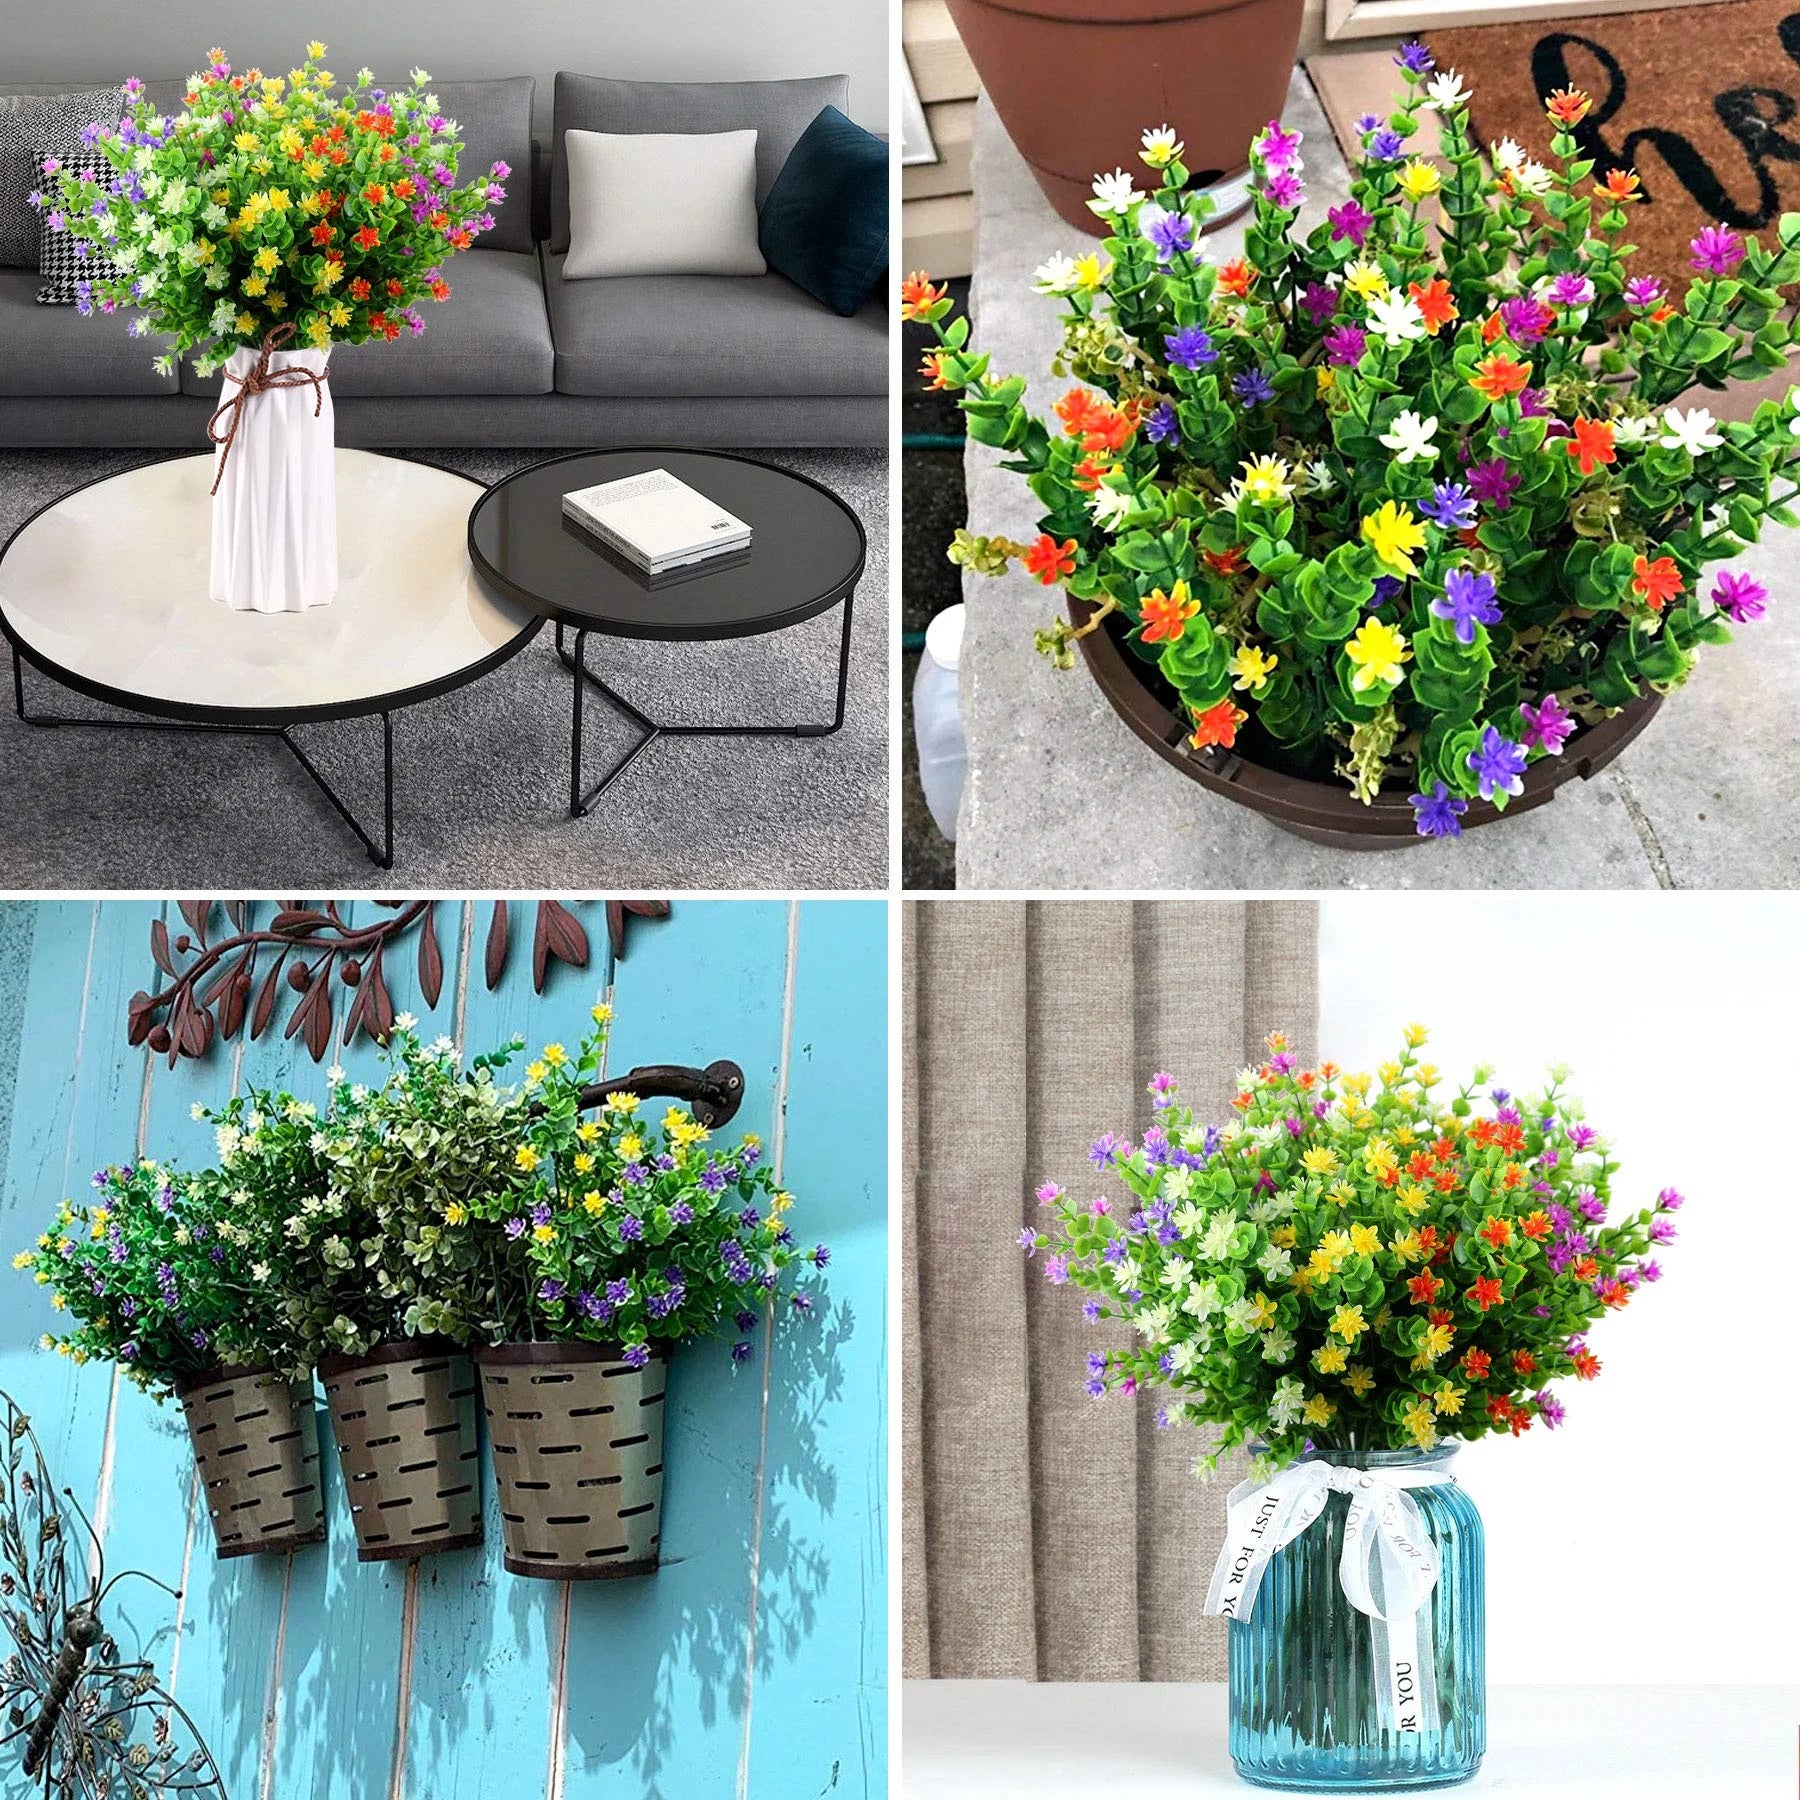 Plastic Artificial Flowers Outdoor UV Resistant Fake Flowers Decoration Greenery Garden Shrubs Plants Home Wedding Party Decor